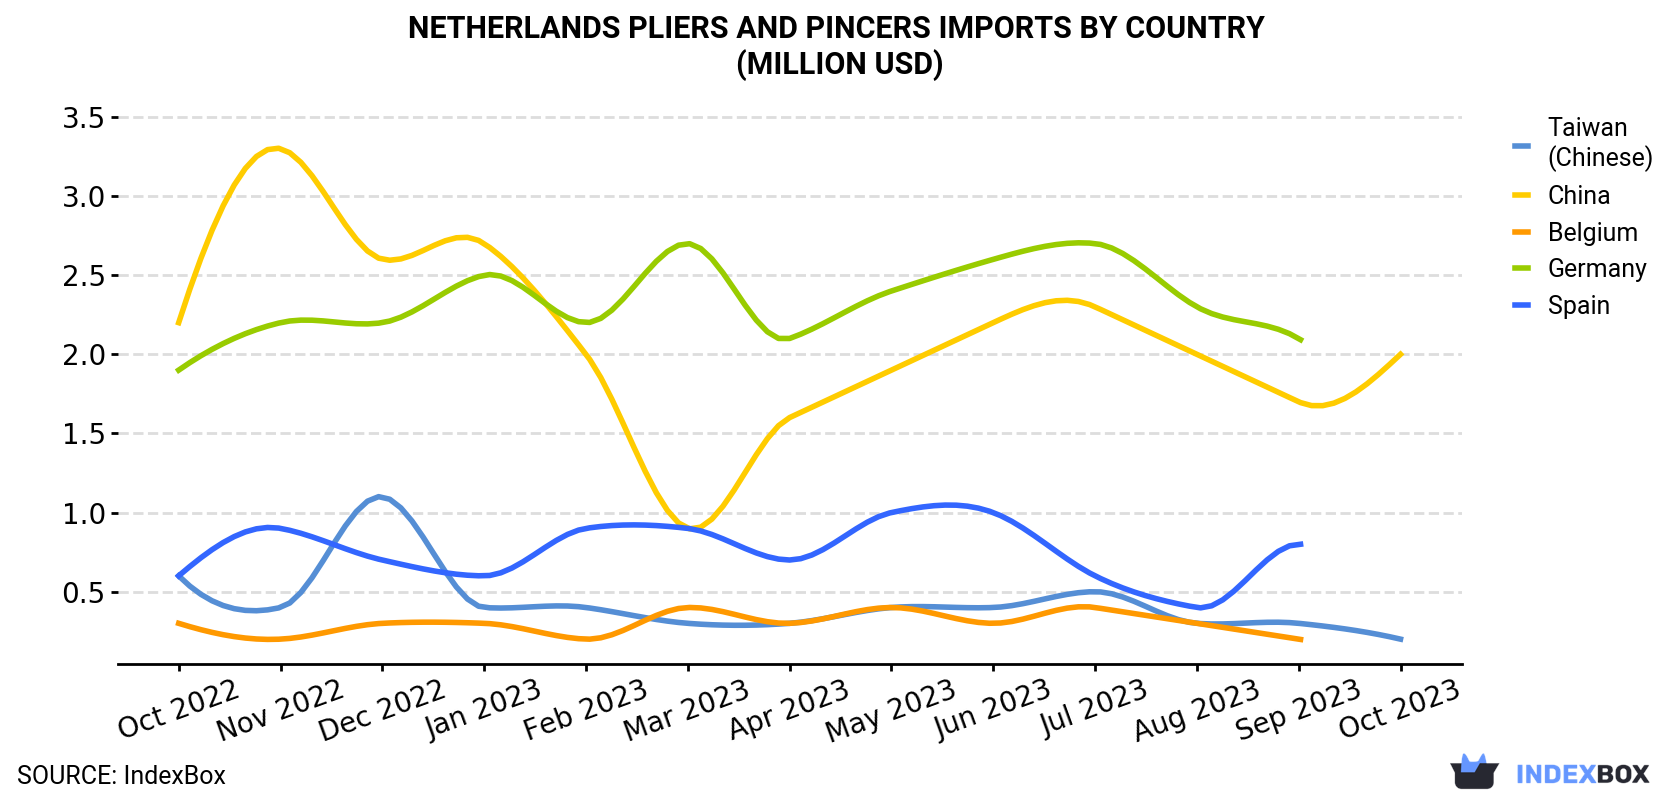 Netherlands Pliers And Pincers Imports By Country (Million USD)